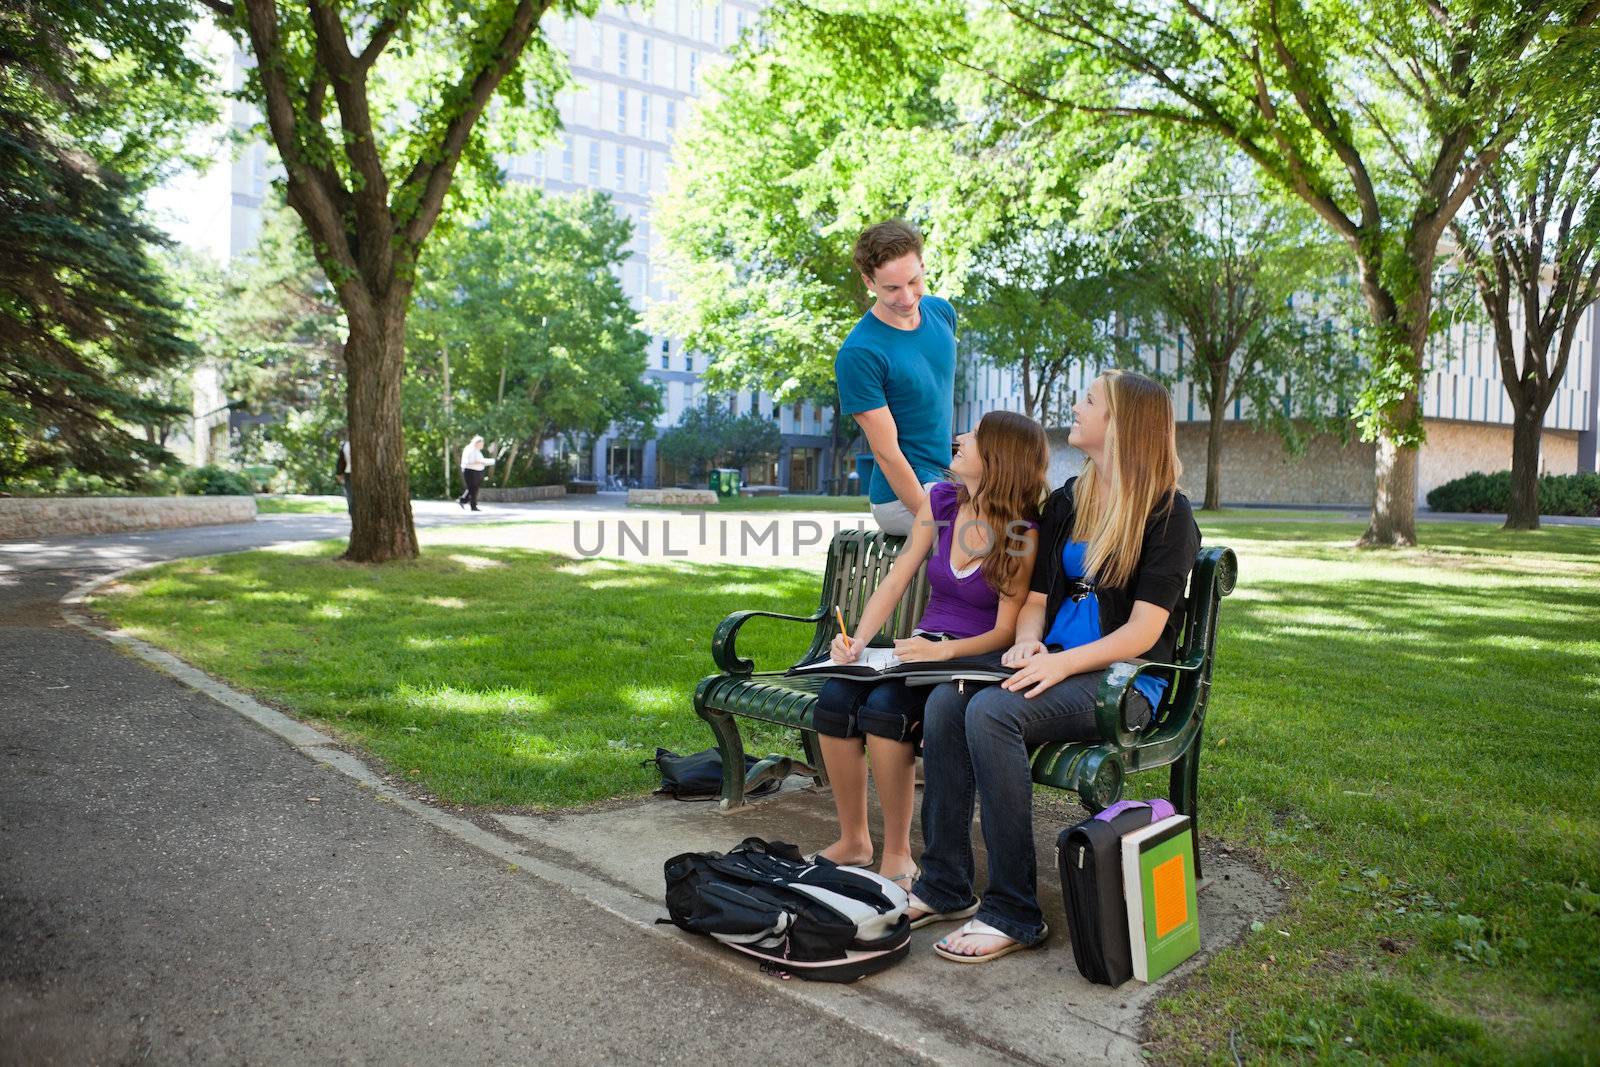 Group of students at university campus